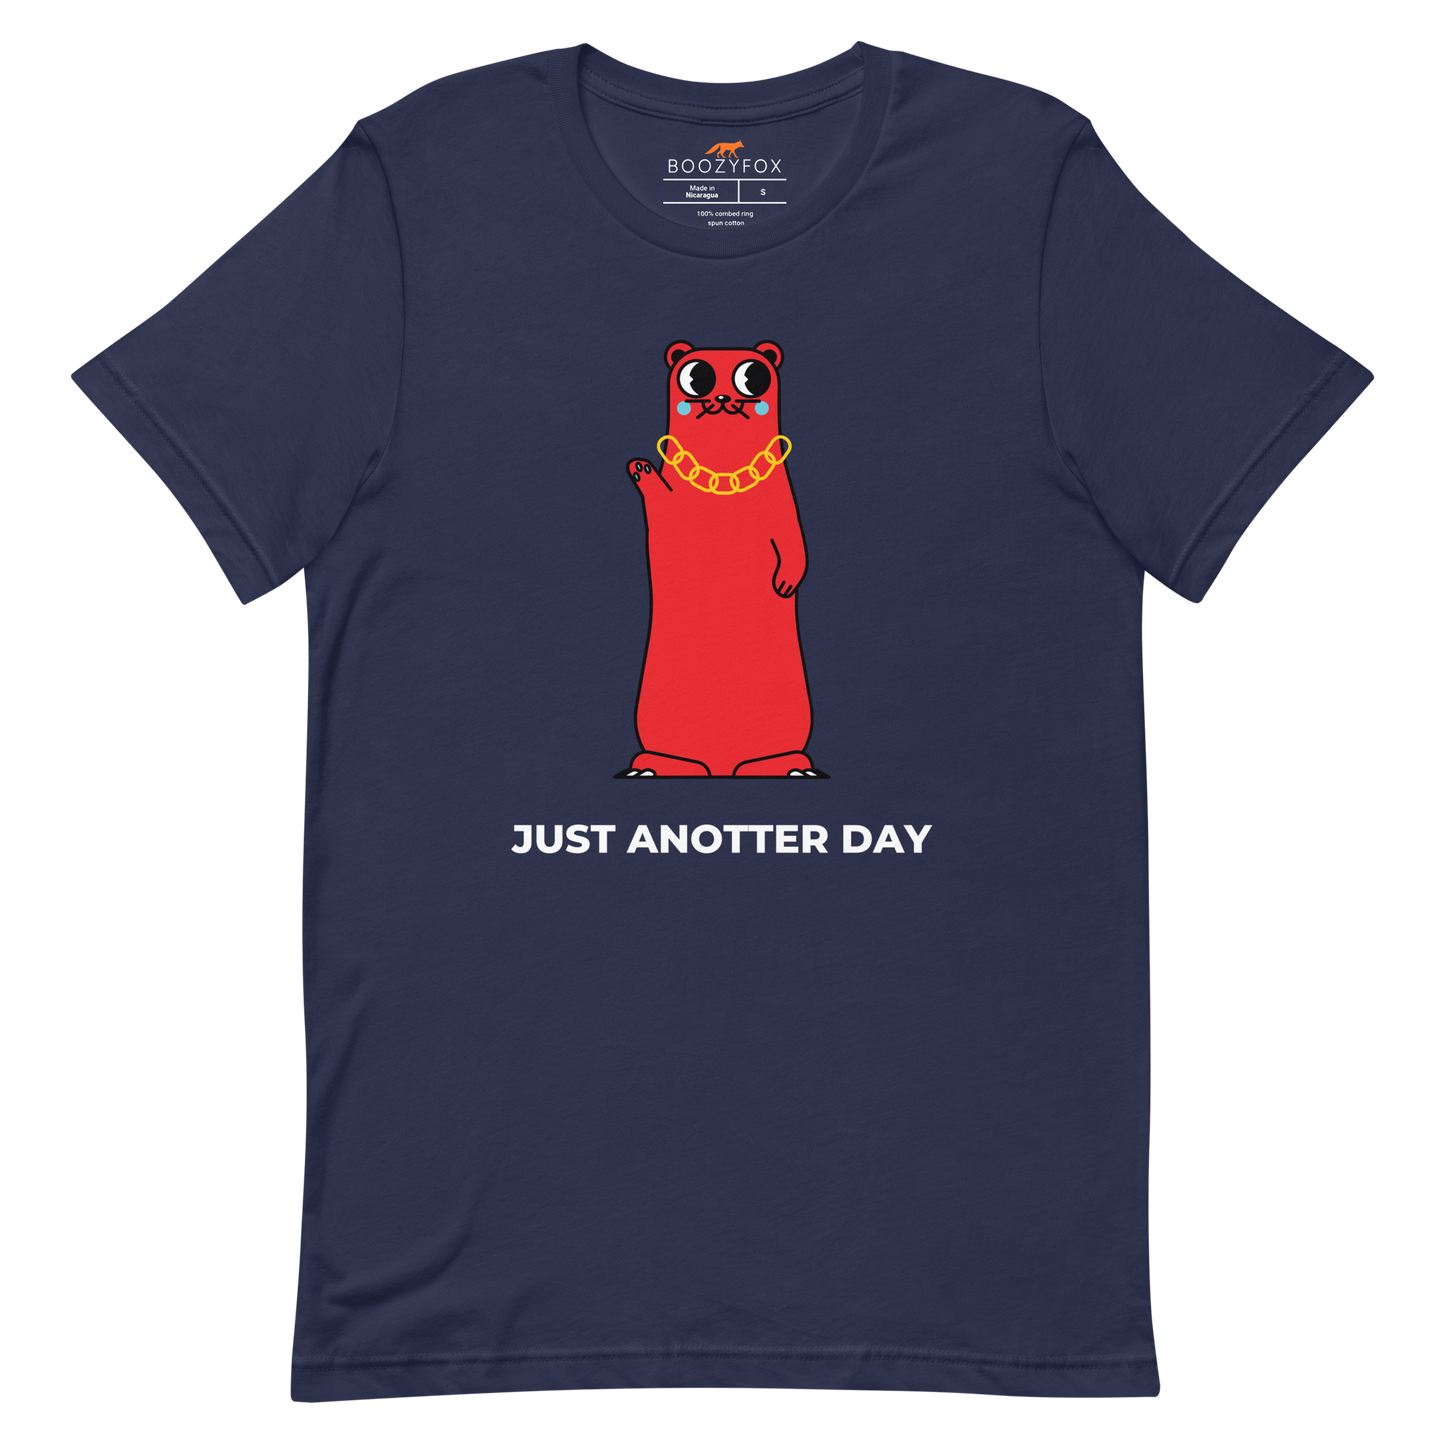 Navy Premium Otter T-Shirt featuring a Just Anotter Day graphic on the chest - Funny Graphic Otter Tees - Boozy Fox